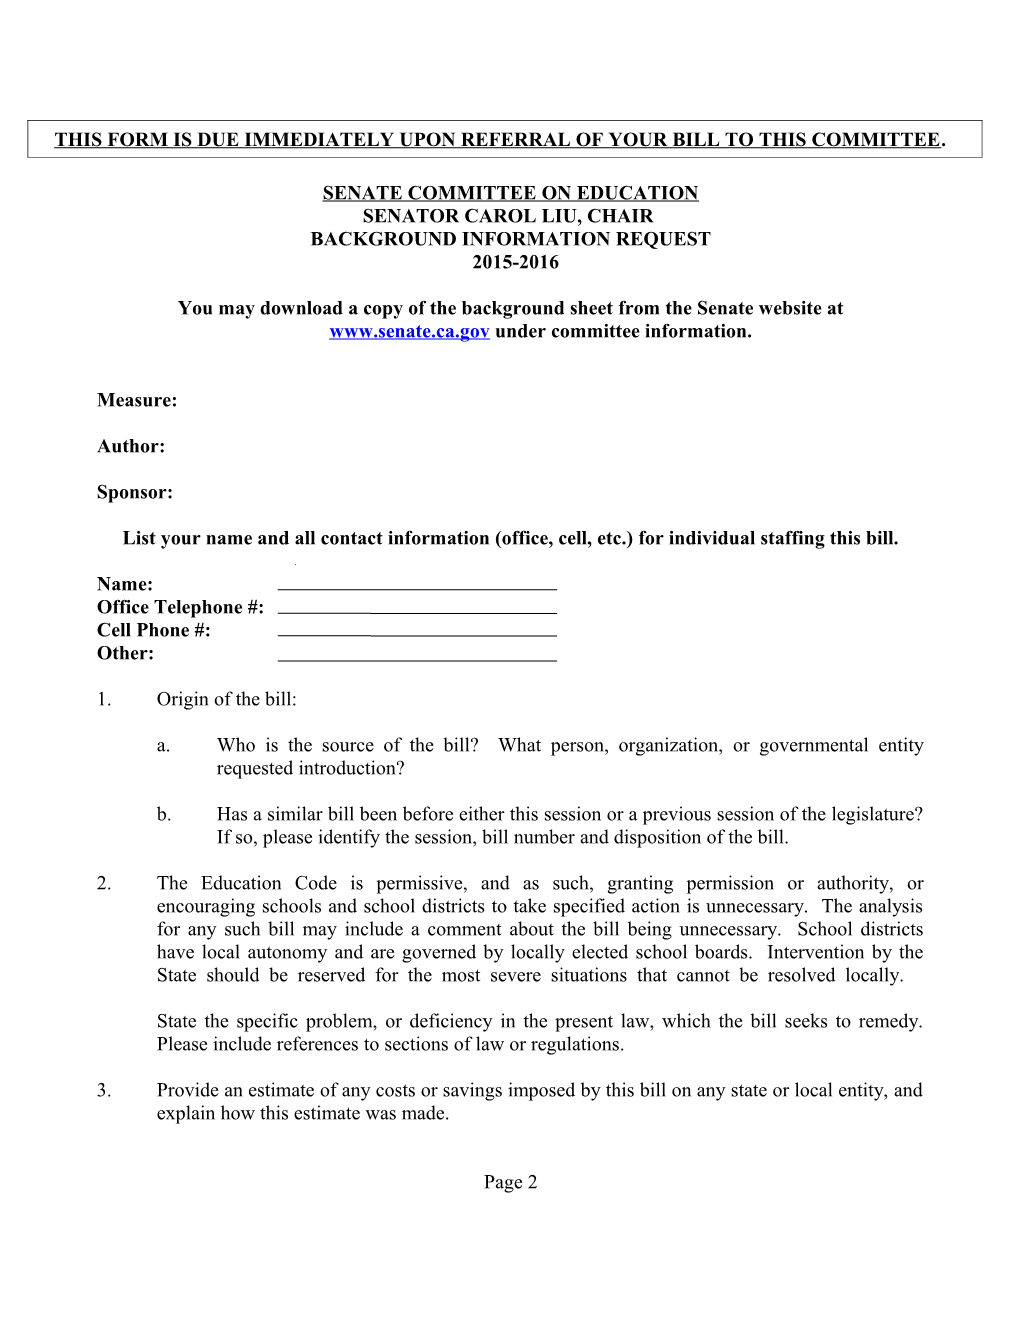 Bills Will Not Be Analyzed Until This Form Is Completed and Received by Committee Staff